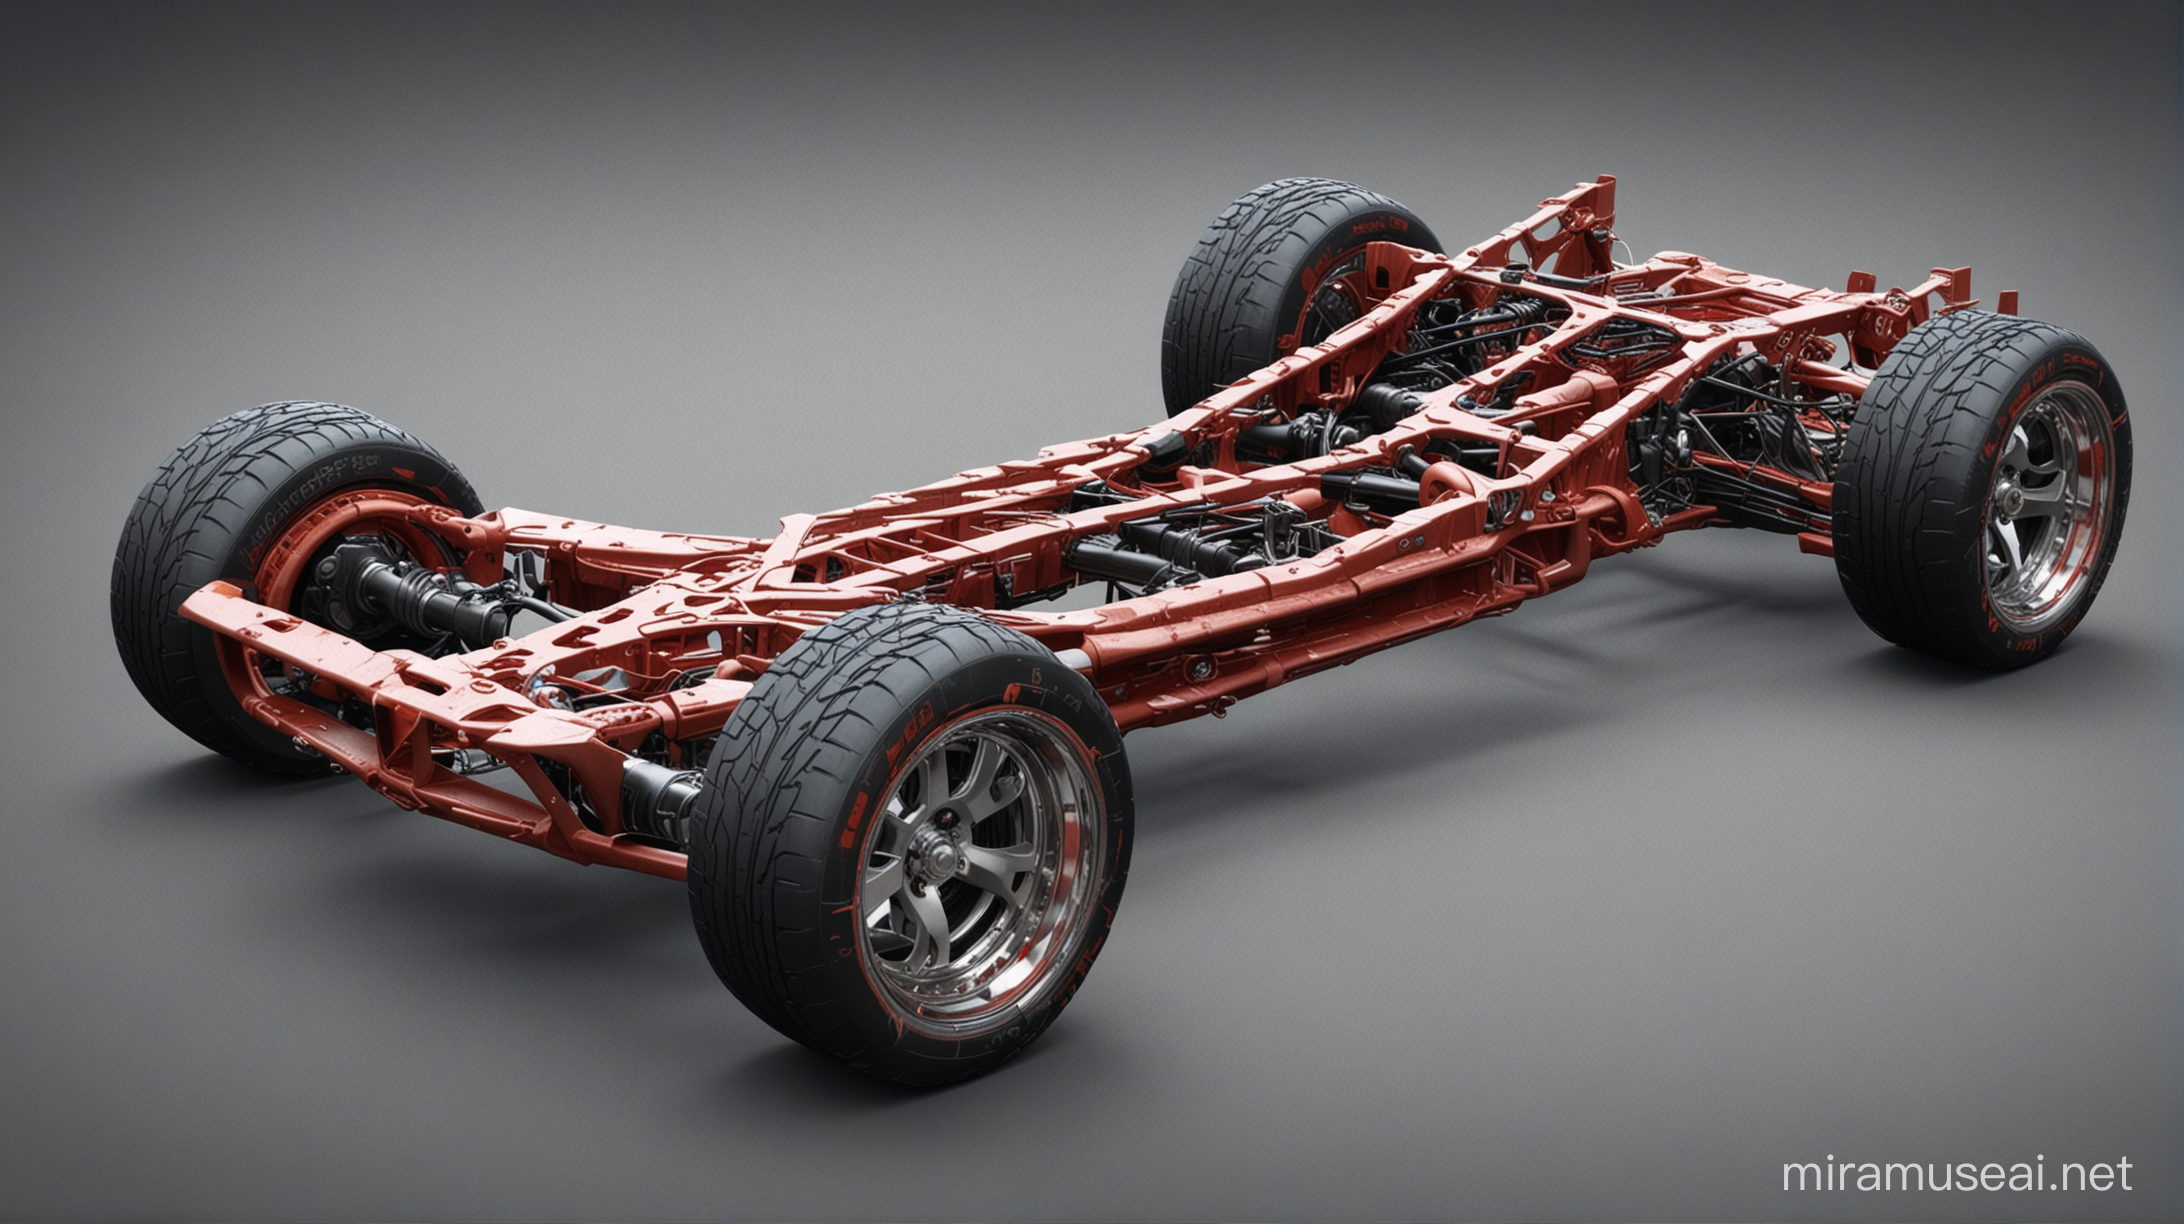 Generate a concept design for a car chassis that is both stylish and functional. The chassis should be made of durable materials and be able to withstand a variety of road conditions. The image should be rendered in a realistic style and have a high resolution